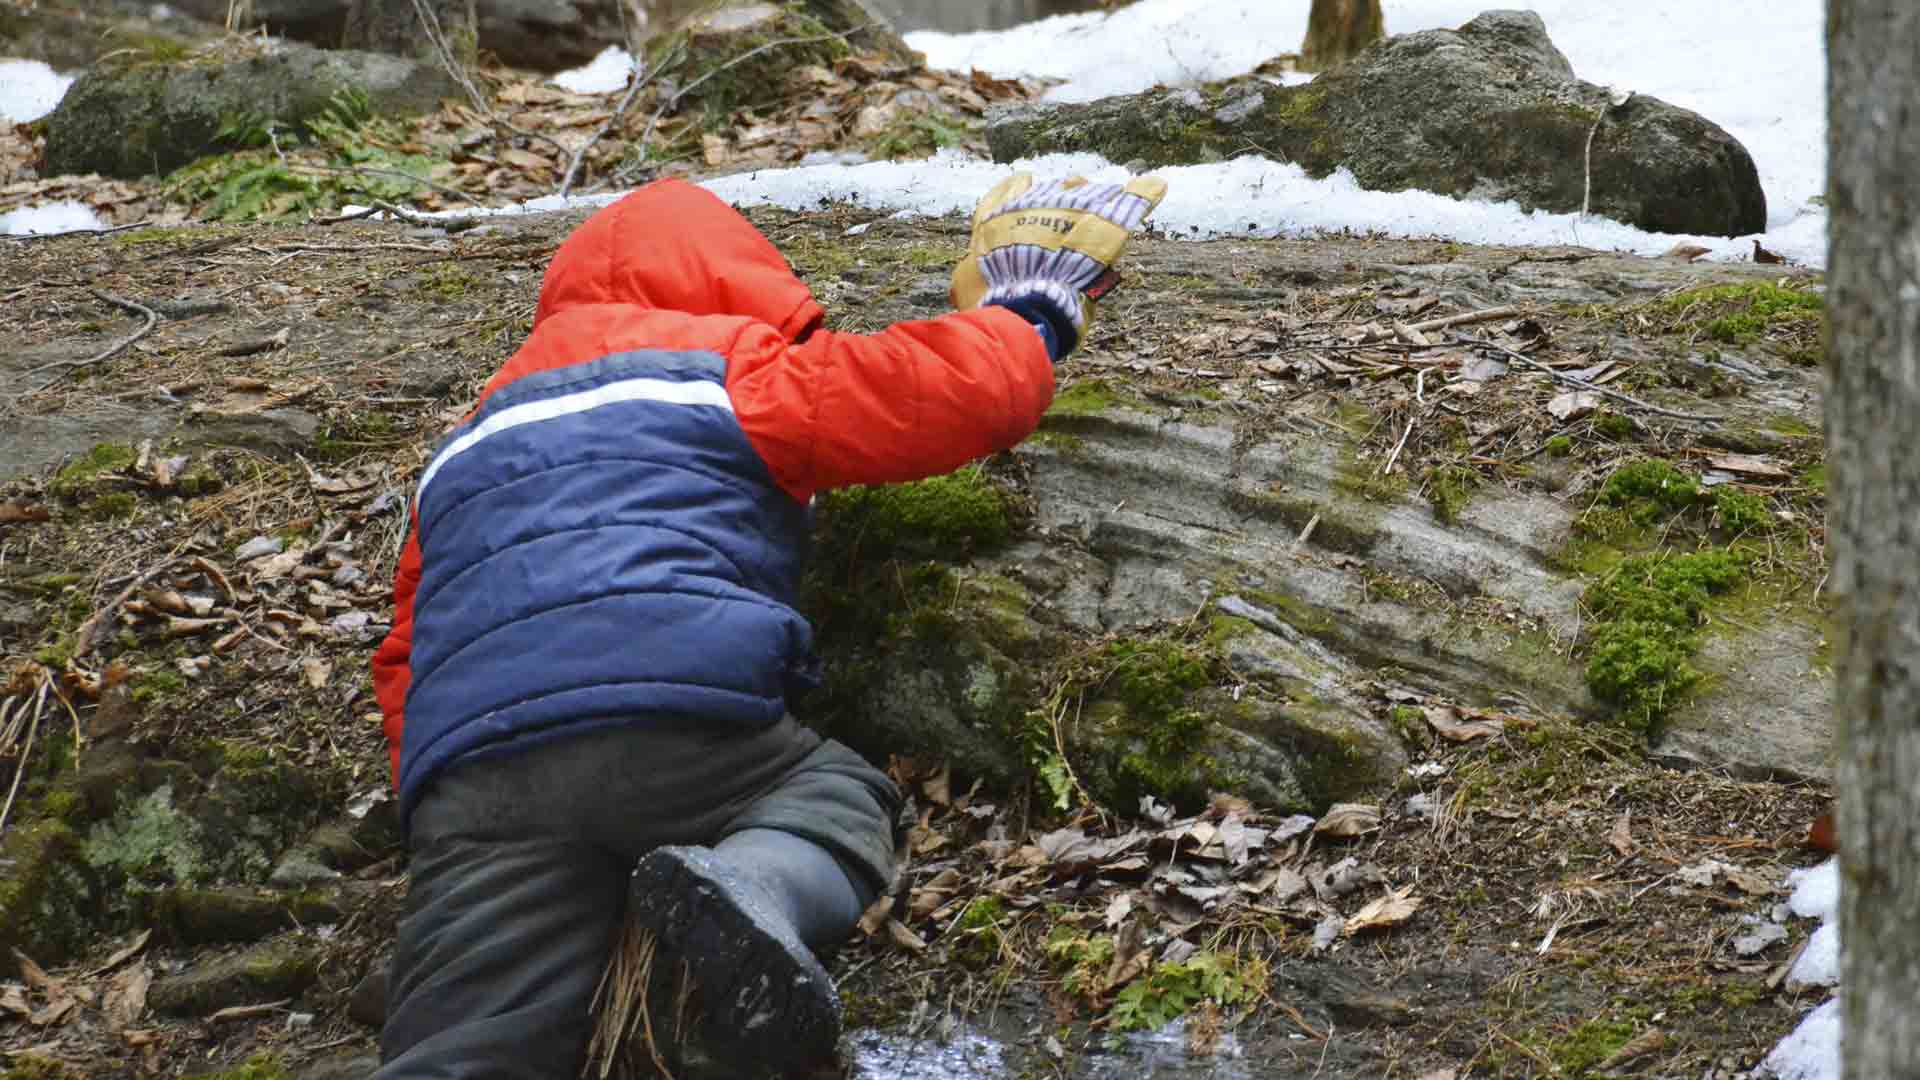 A boy climbs to his “sit spot.” Every Forest Monday begins with kindergartners spending 10 minutes sitting quietly alone in designated spots in the woods.  